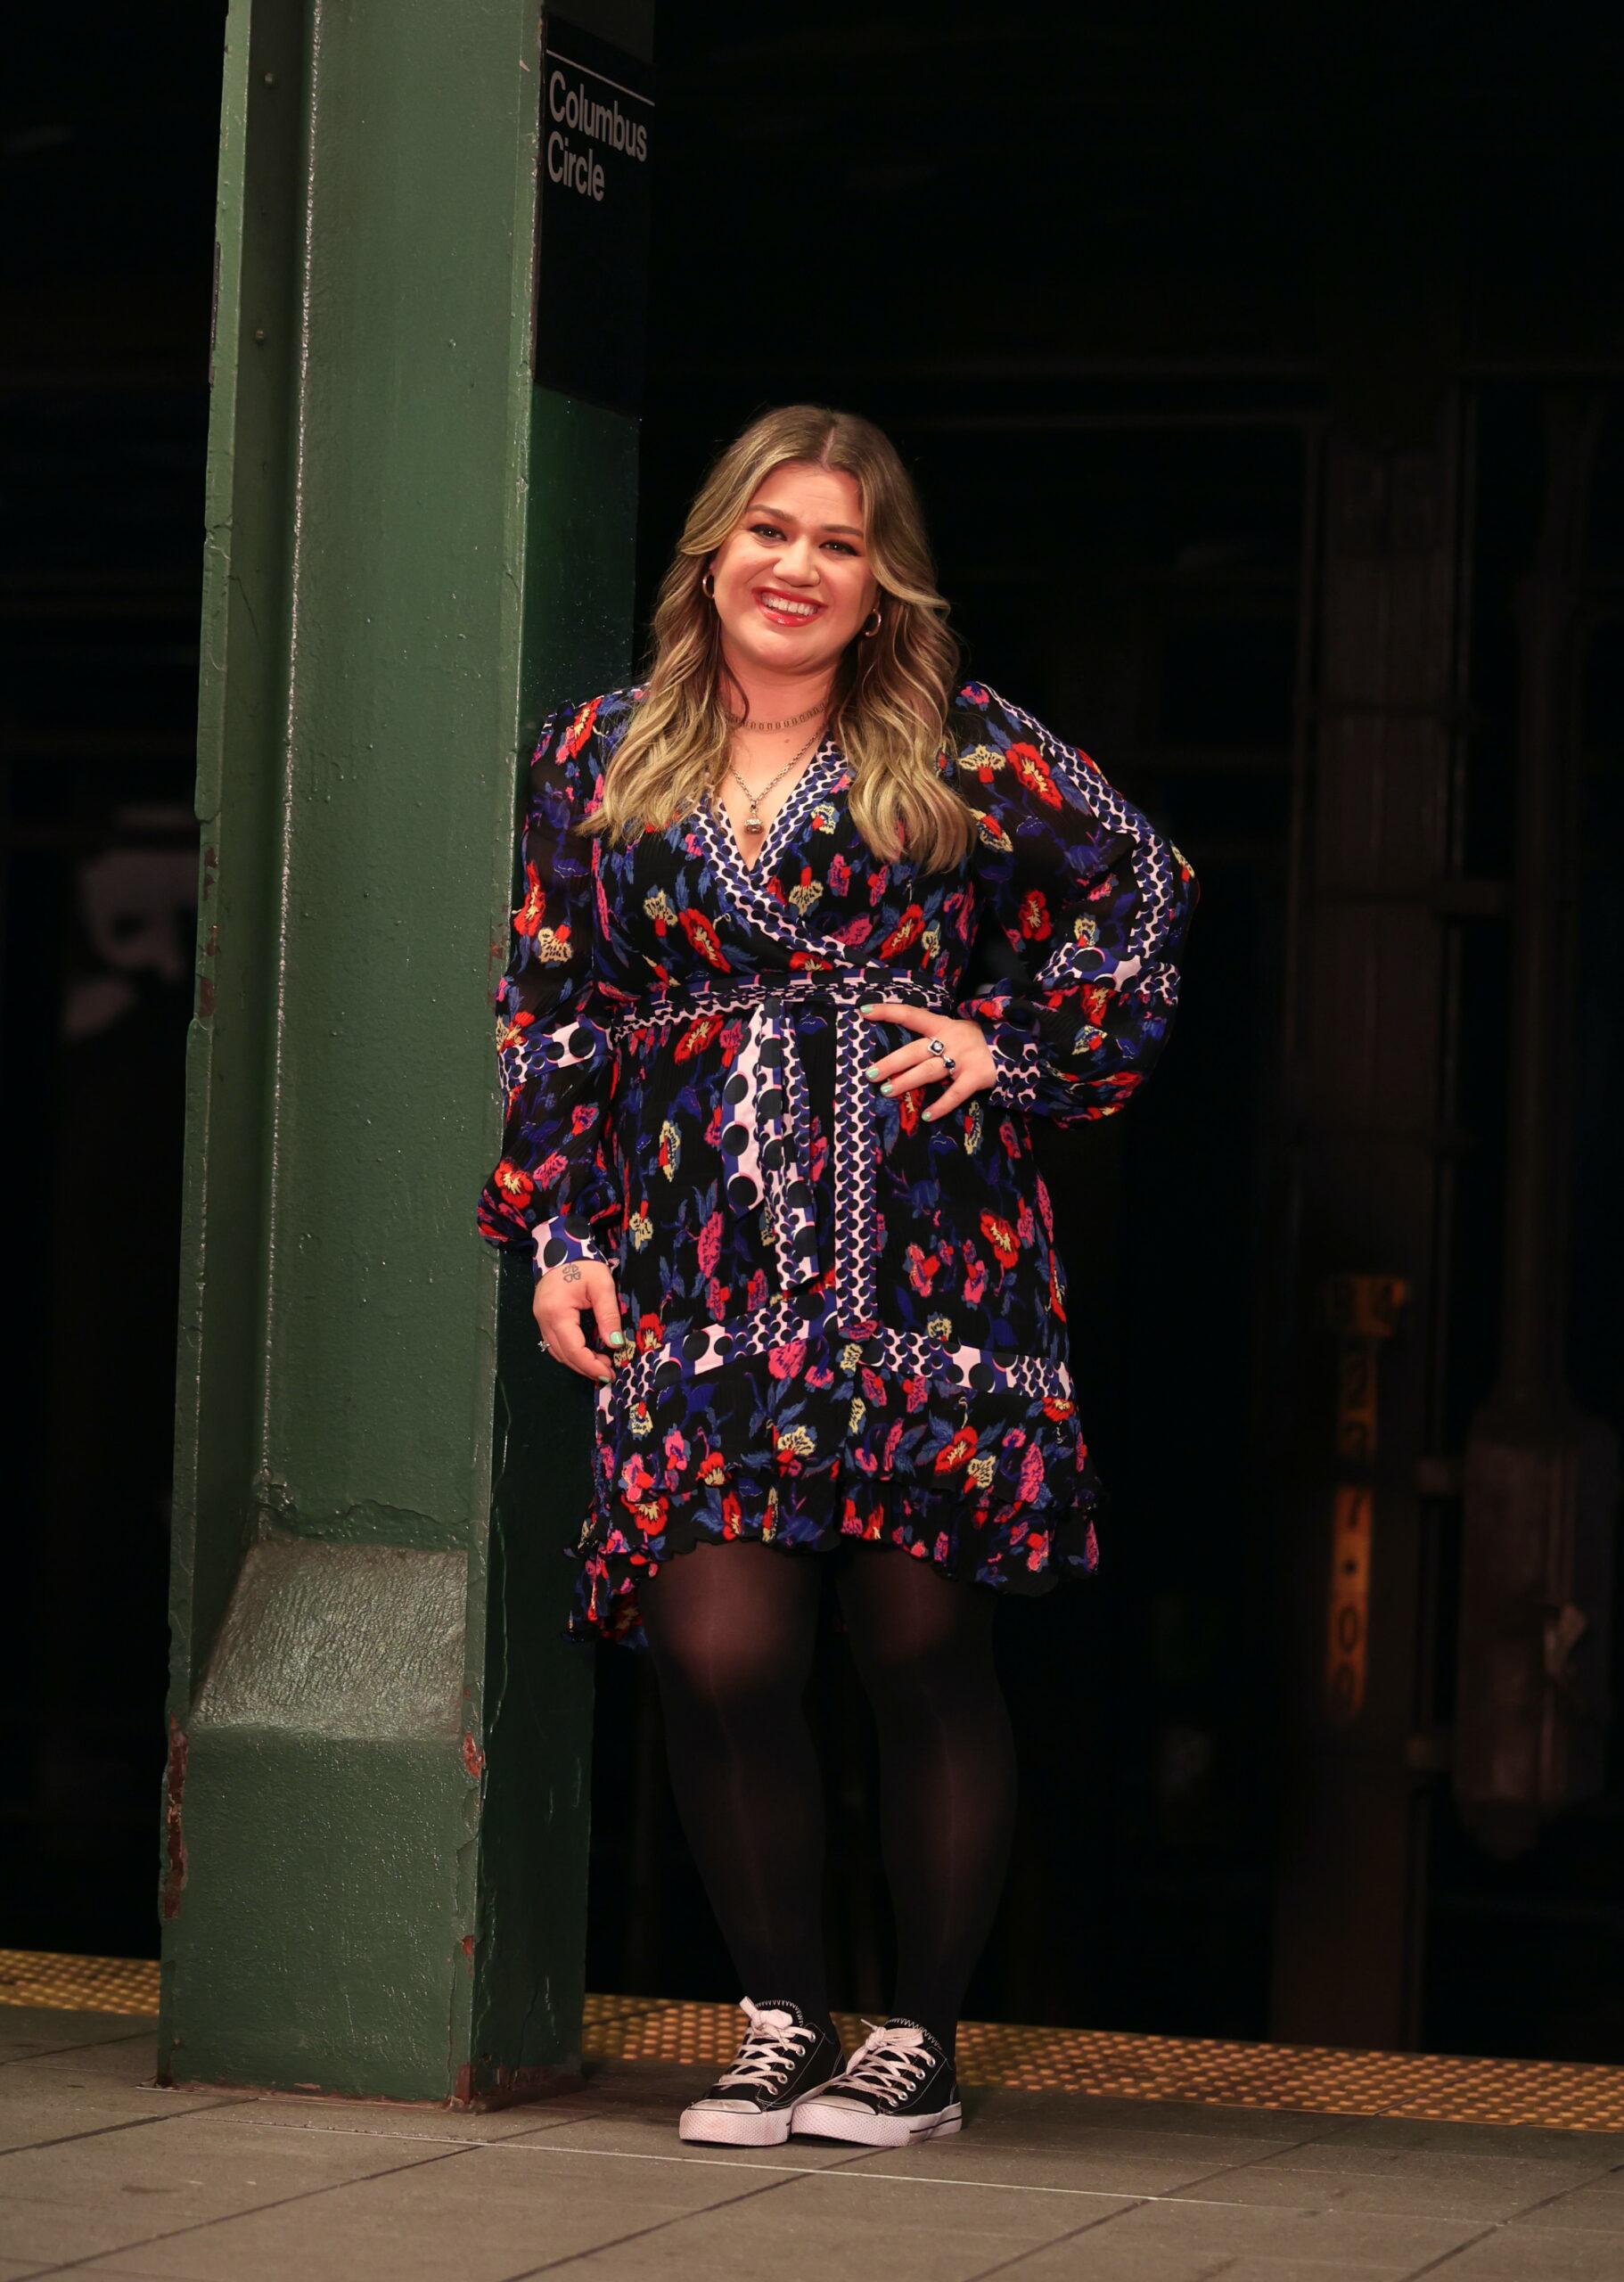 Kelly Clarkson is seen filming a music video